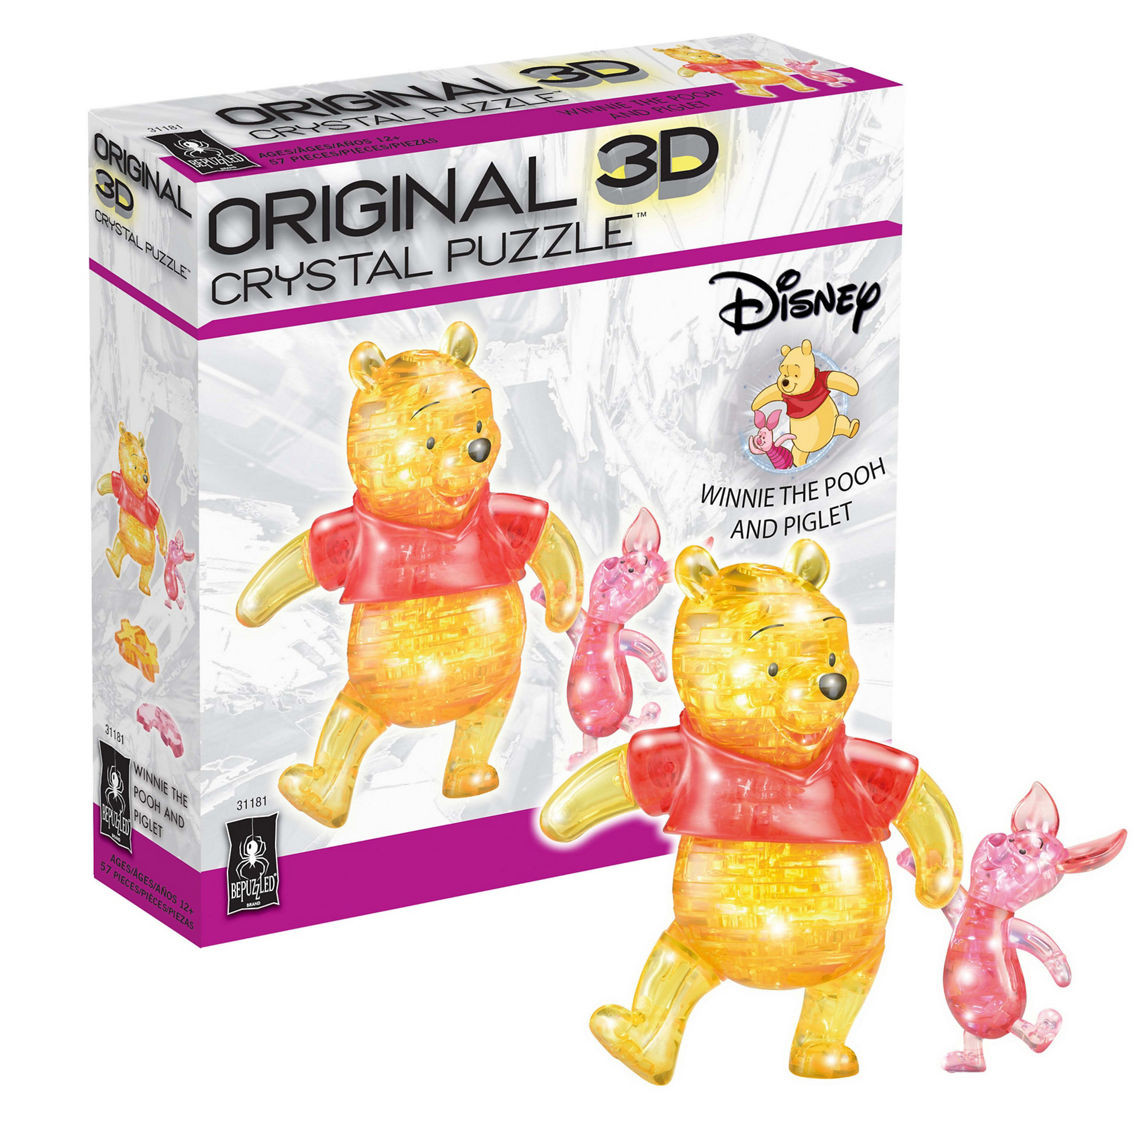 BePuzzled 3D Crystal Puzzle Disney Winnie the Pooh and Piglet (Multi-color): 57 Pcs - Image 2 of 5